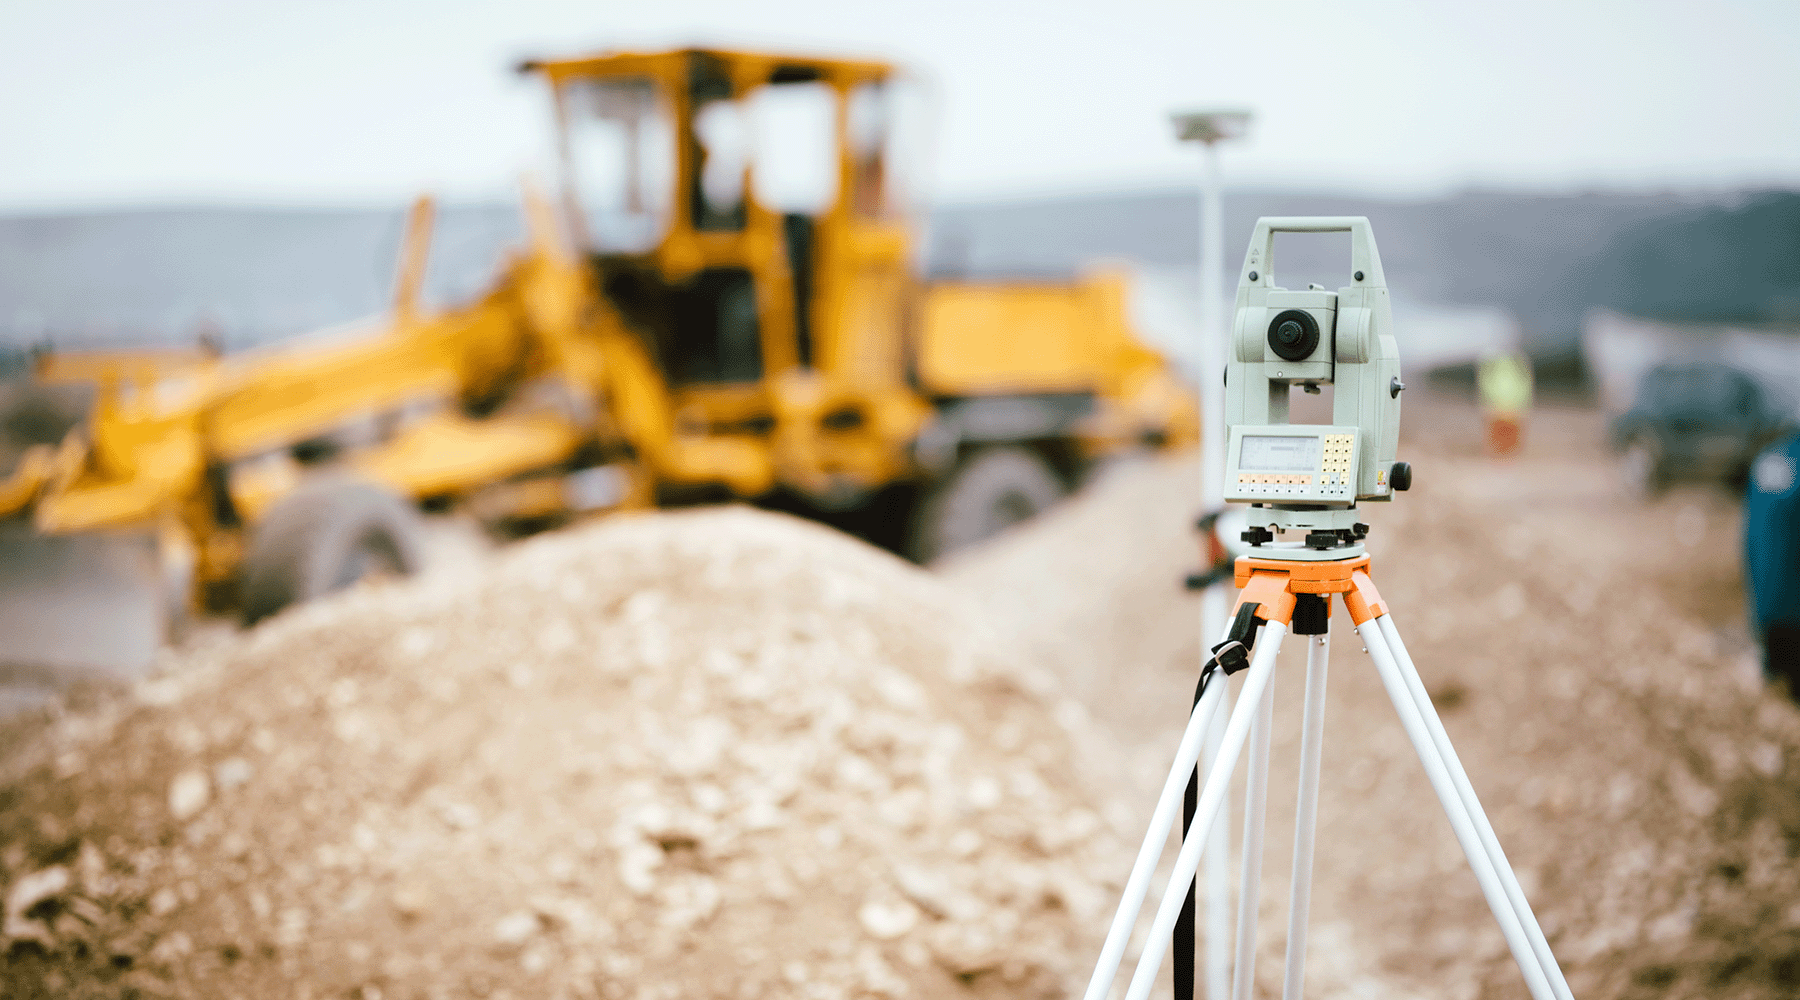 Featured image is a survey tool pointed towards a yellow cat machine in the background of a construction site.